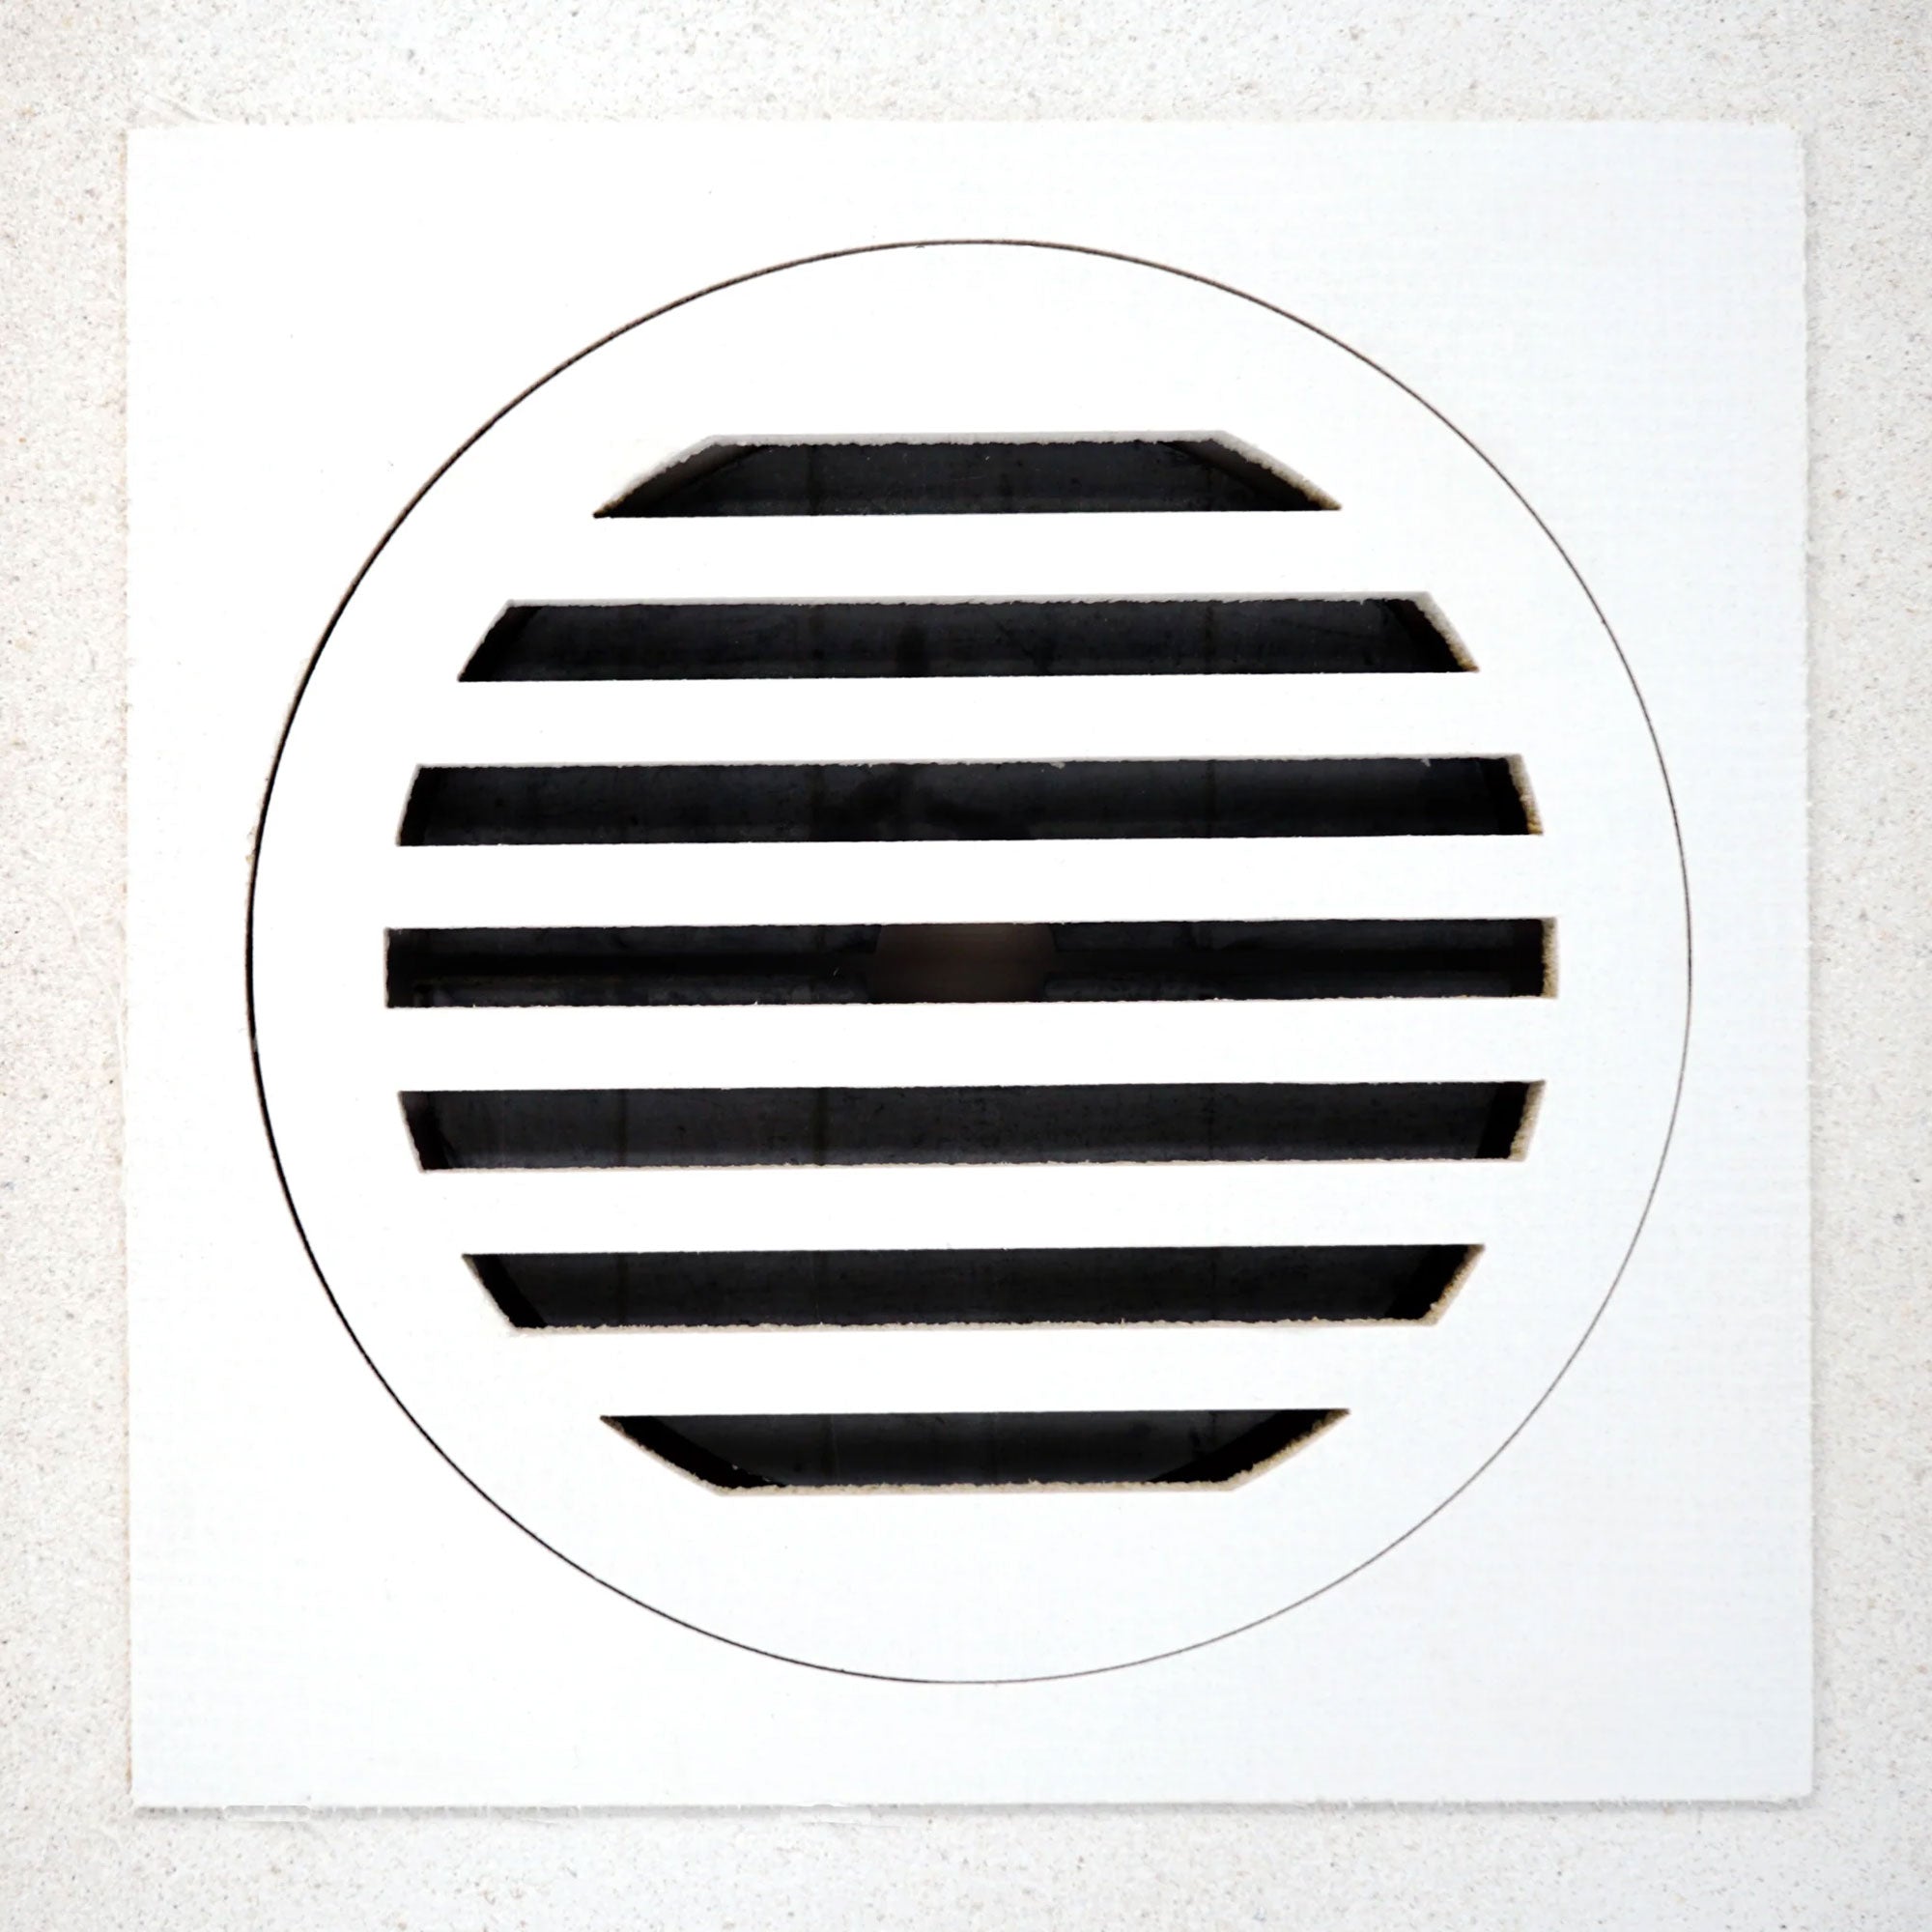 Envisivent Removable Magnetic Round Flush Mount Air Supply Vent